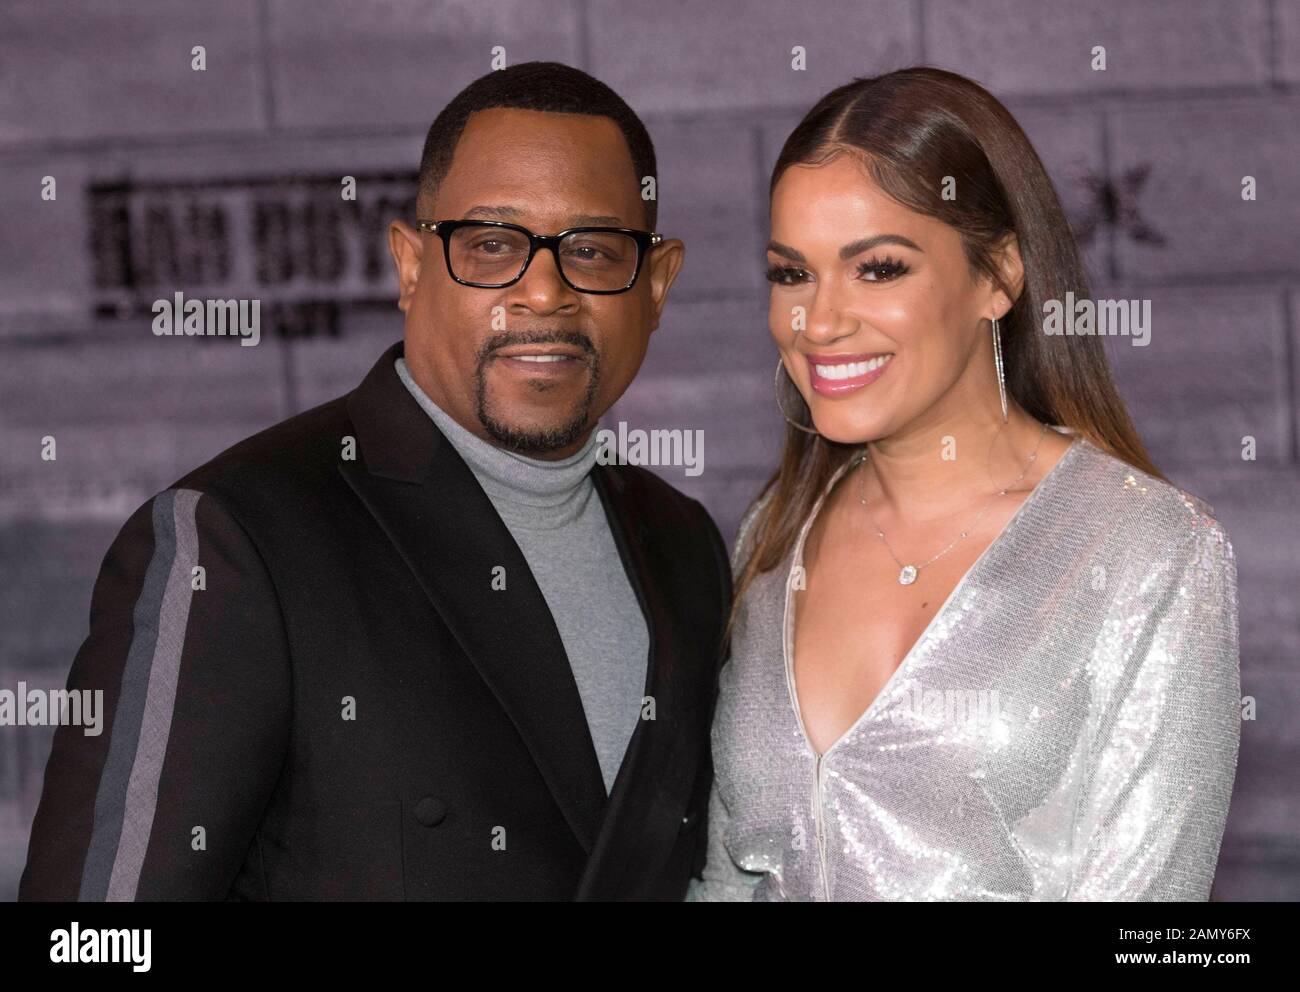 Martin Lawrence and Roberta Moradfar attend the premiere of 'Bad Boys For Life' at TCL Chinese Theatre in Hollywood, Los Angeles, California, USA, on 14 January 2020. | usage worldwide Stock Photo